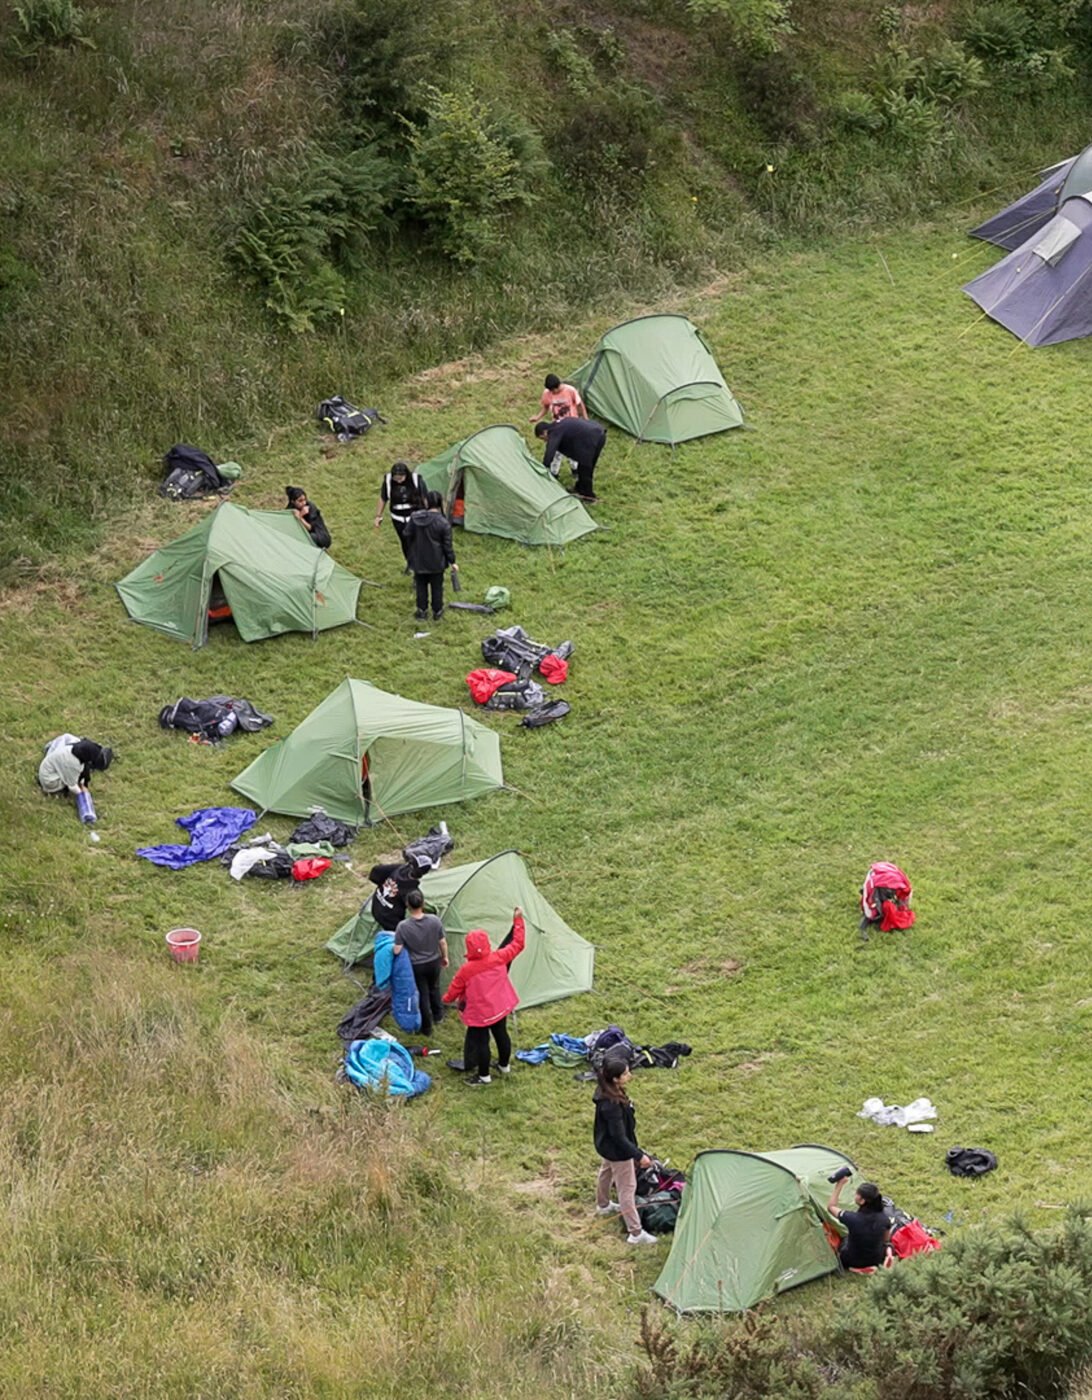 An aerial shot of a campsite. The tents are on grass, in a circle with a large space in the middle. There are young people next to their tents setting them up.